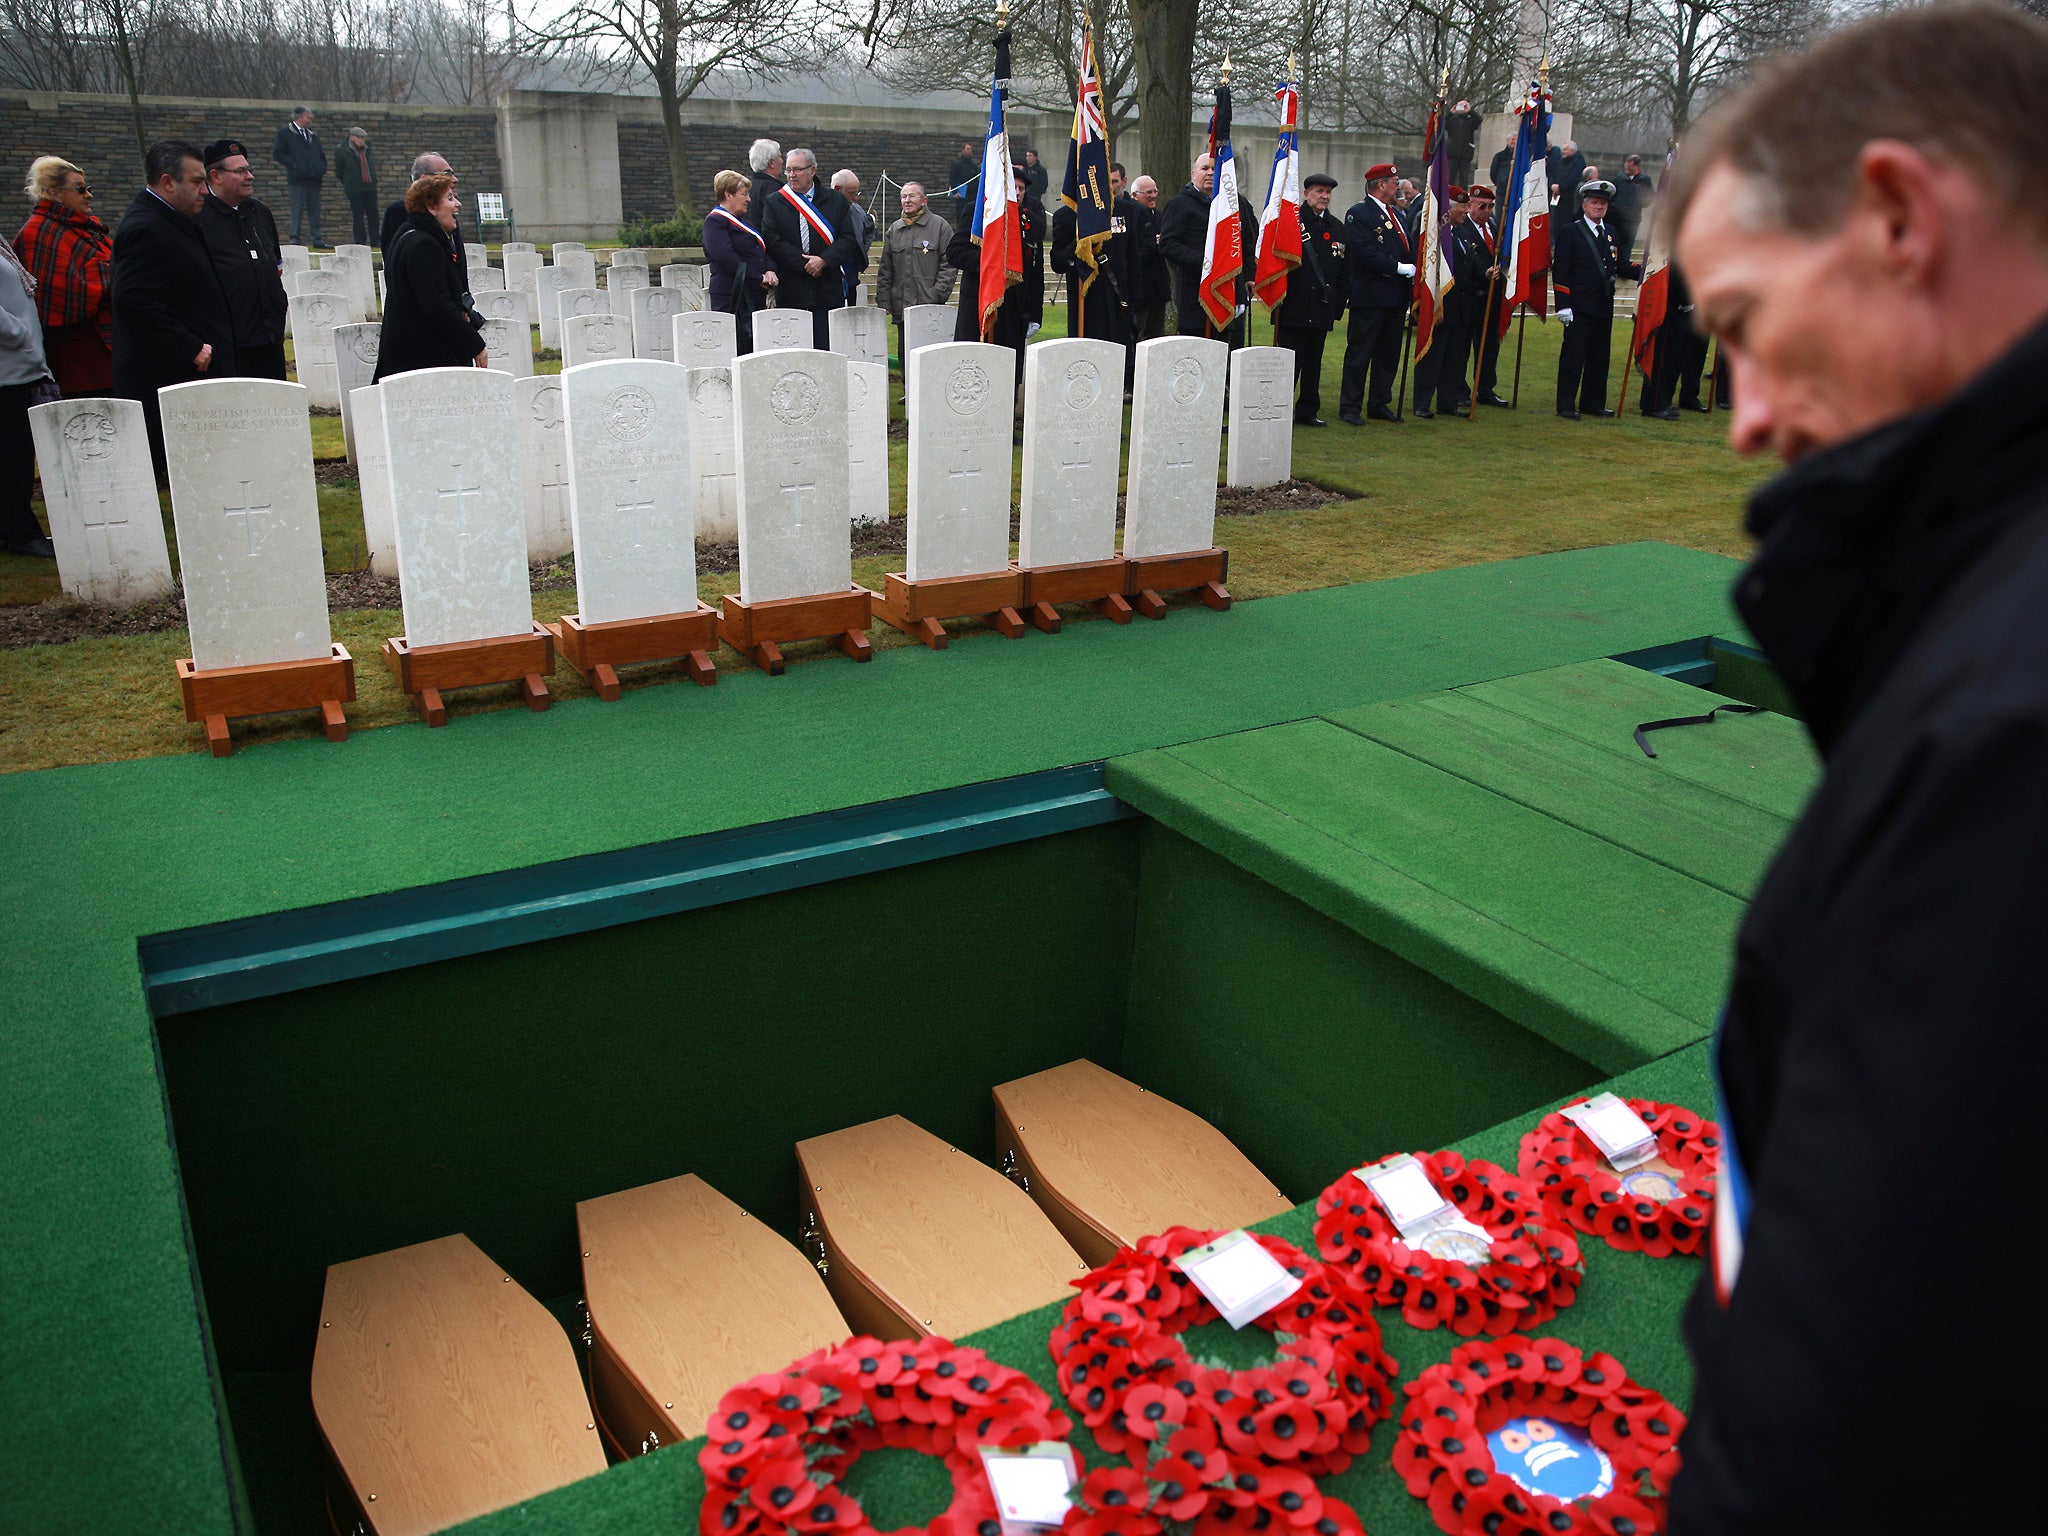 A mourner looks at coffins of British World War One soldiers after a re-burial ceremony at Loos British Cemetery on March 14, 2014 in Loos-en-Gohelle, France. Almost 100 years after they were killed in action in the World War One battle of Loos in 1915, twenty British soldiers have been re-interred in the Commonwealth War Graves Commission Loos British Cemetery in Northern France (Getty)